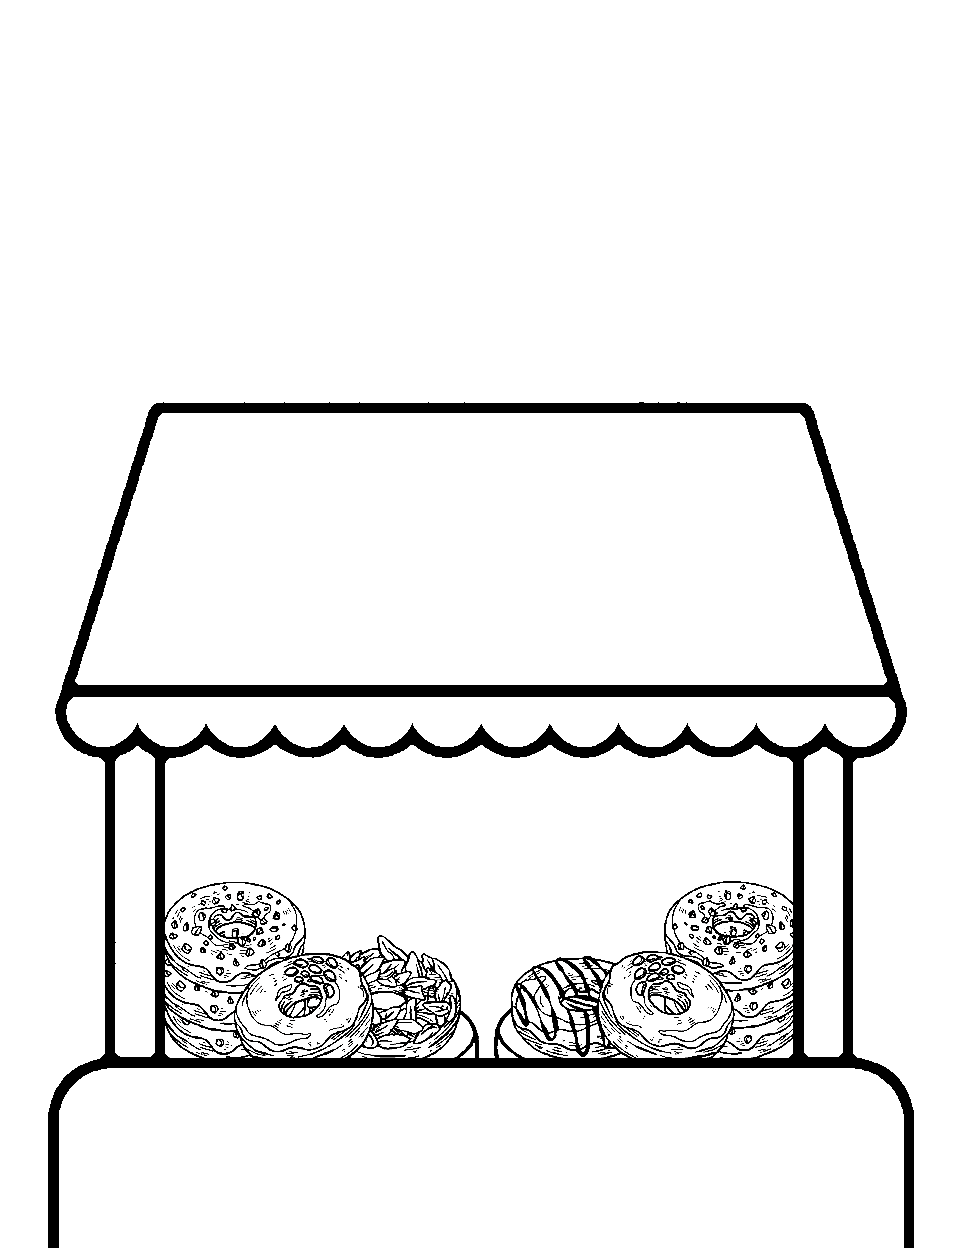 Donut Festival Coloring Page - A miniature donut stall with various types of donuts.